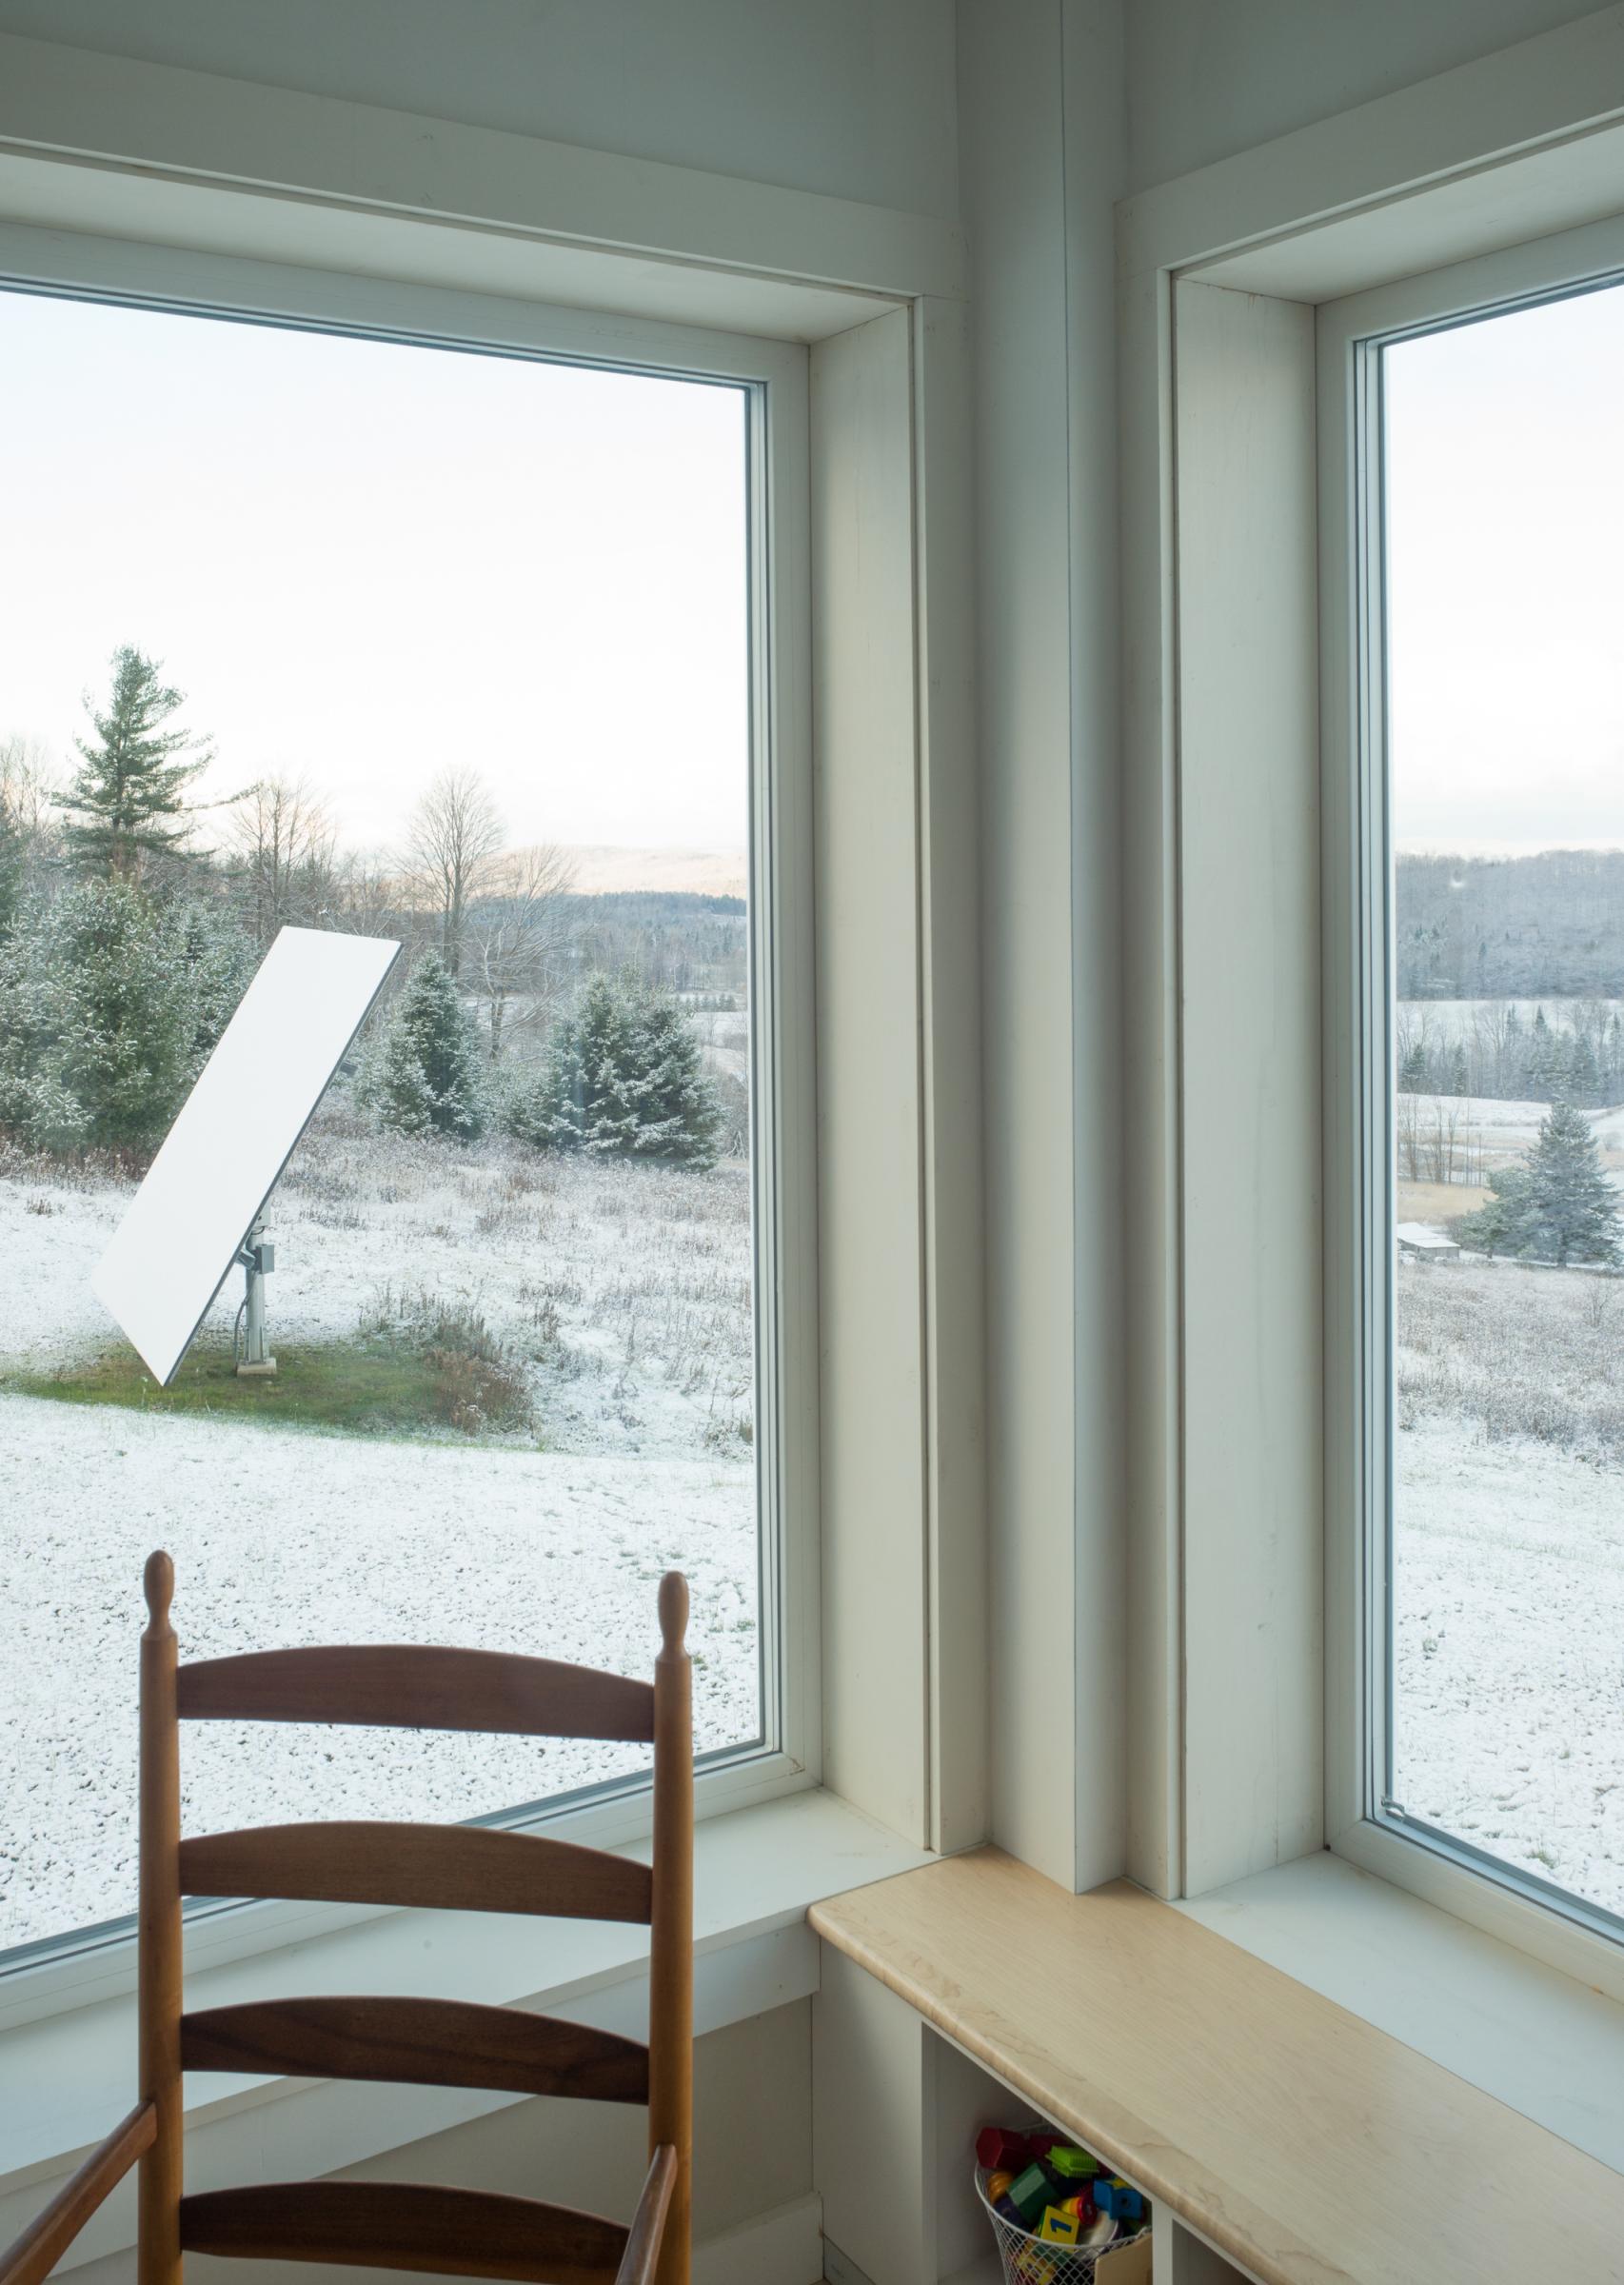 Hillside Residence, Vermont - View of solar collector from inside